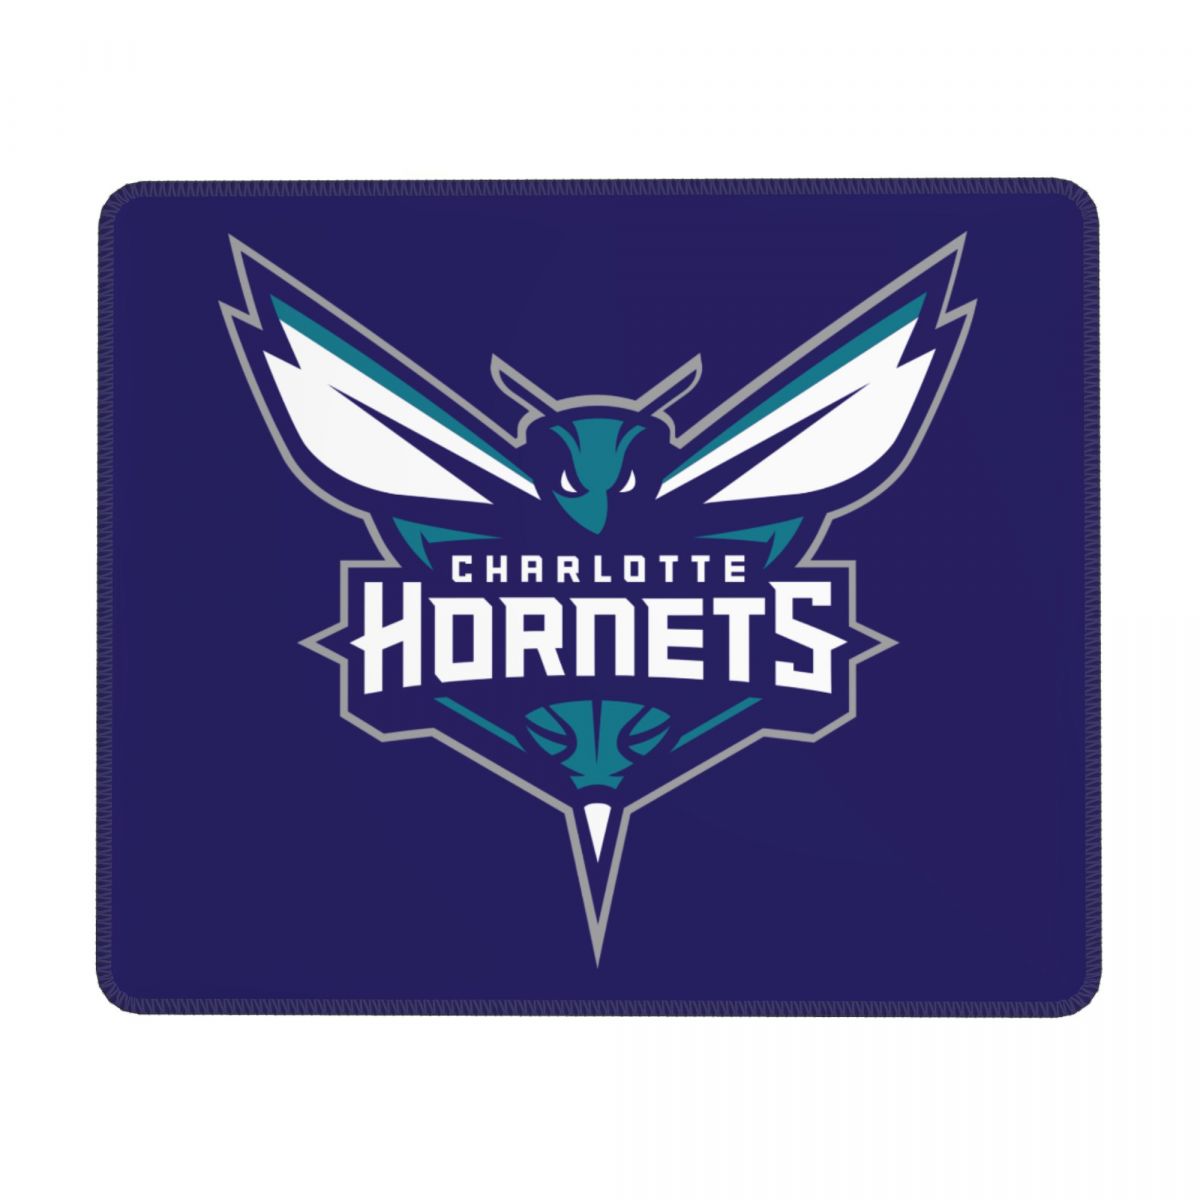 Charlotte Hornets Square Gaming Mouse Pad with Stitched Edge